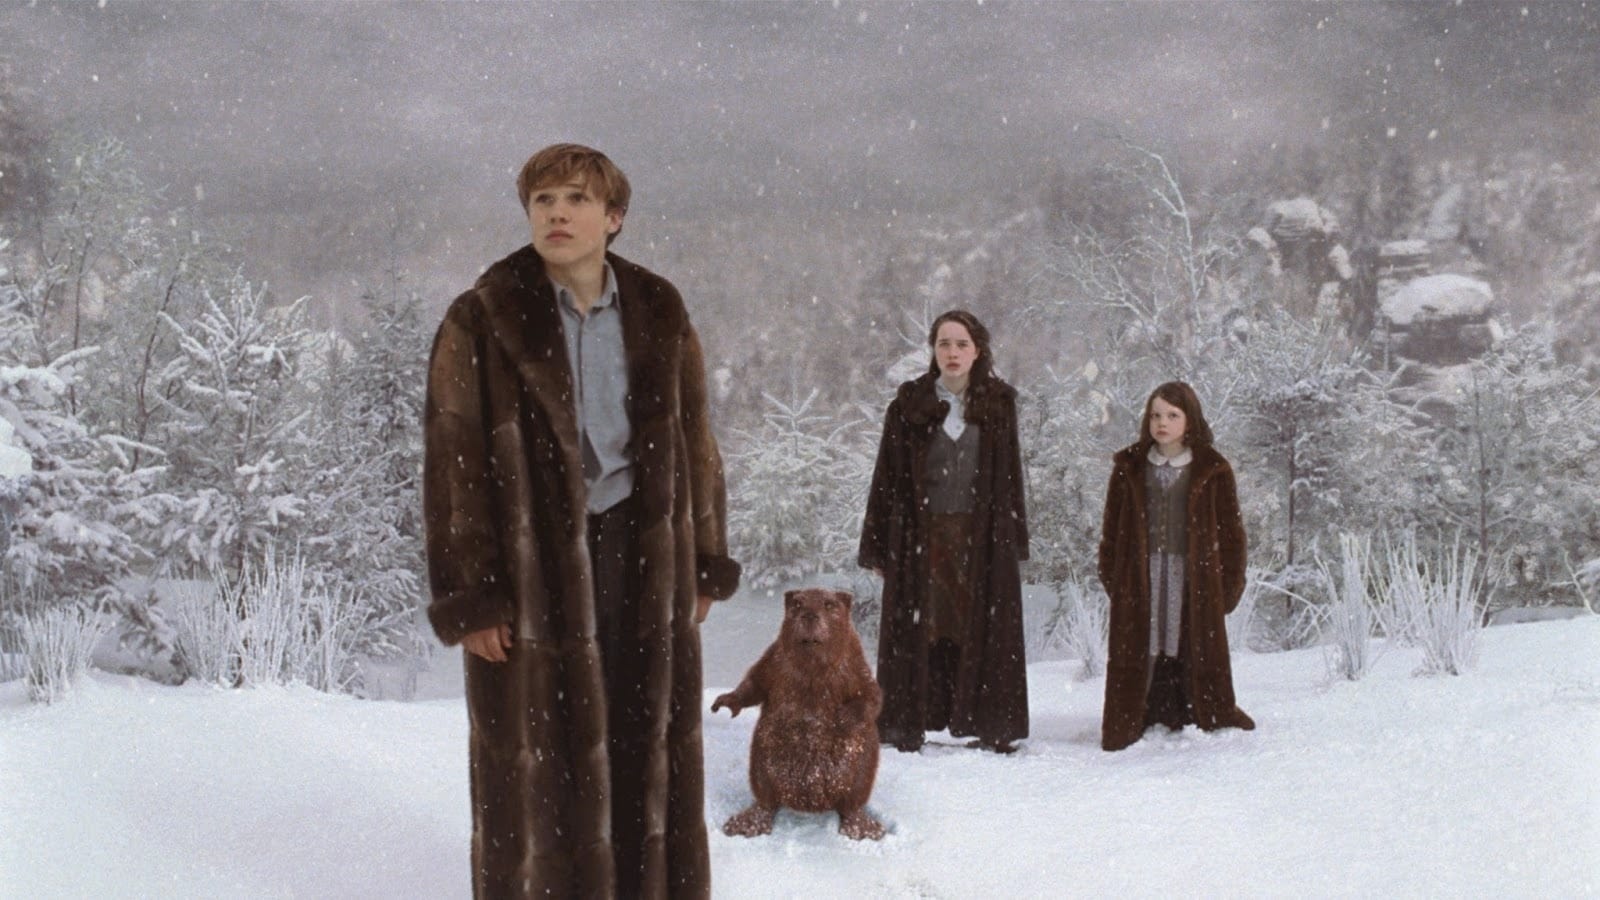 The Chronicles of Narnia: The Lion, the Witch and the Wardrobe (2005)